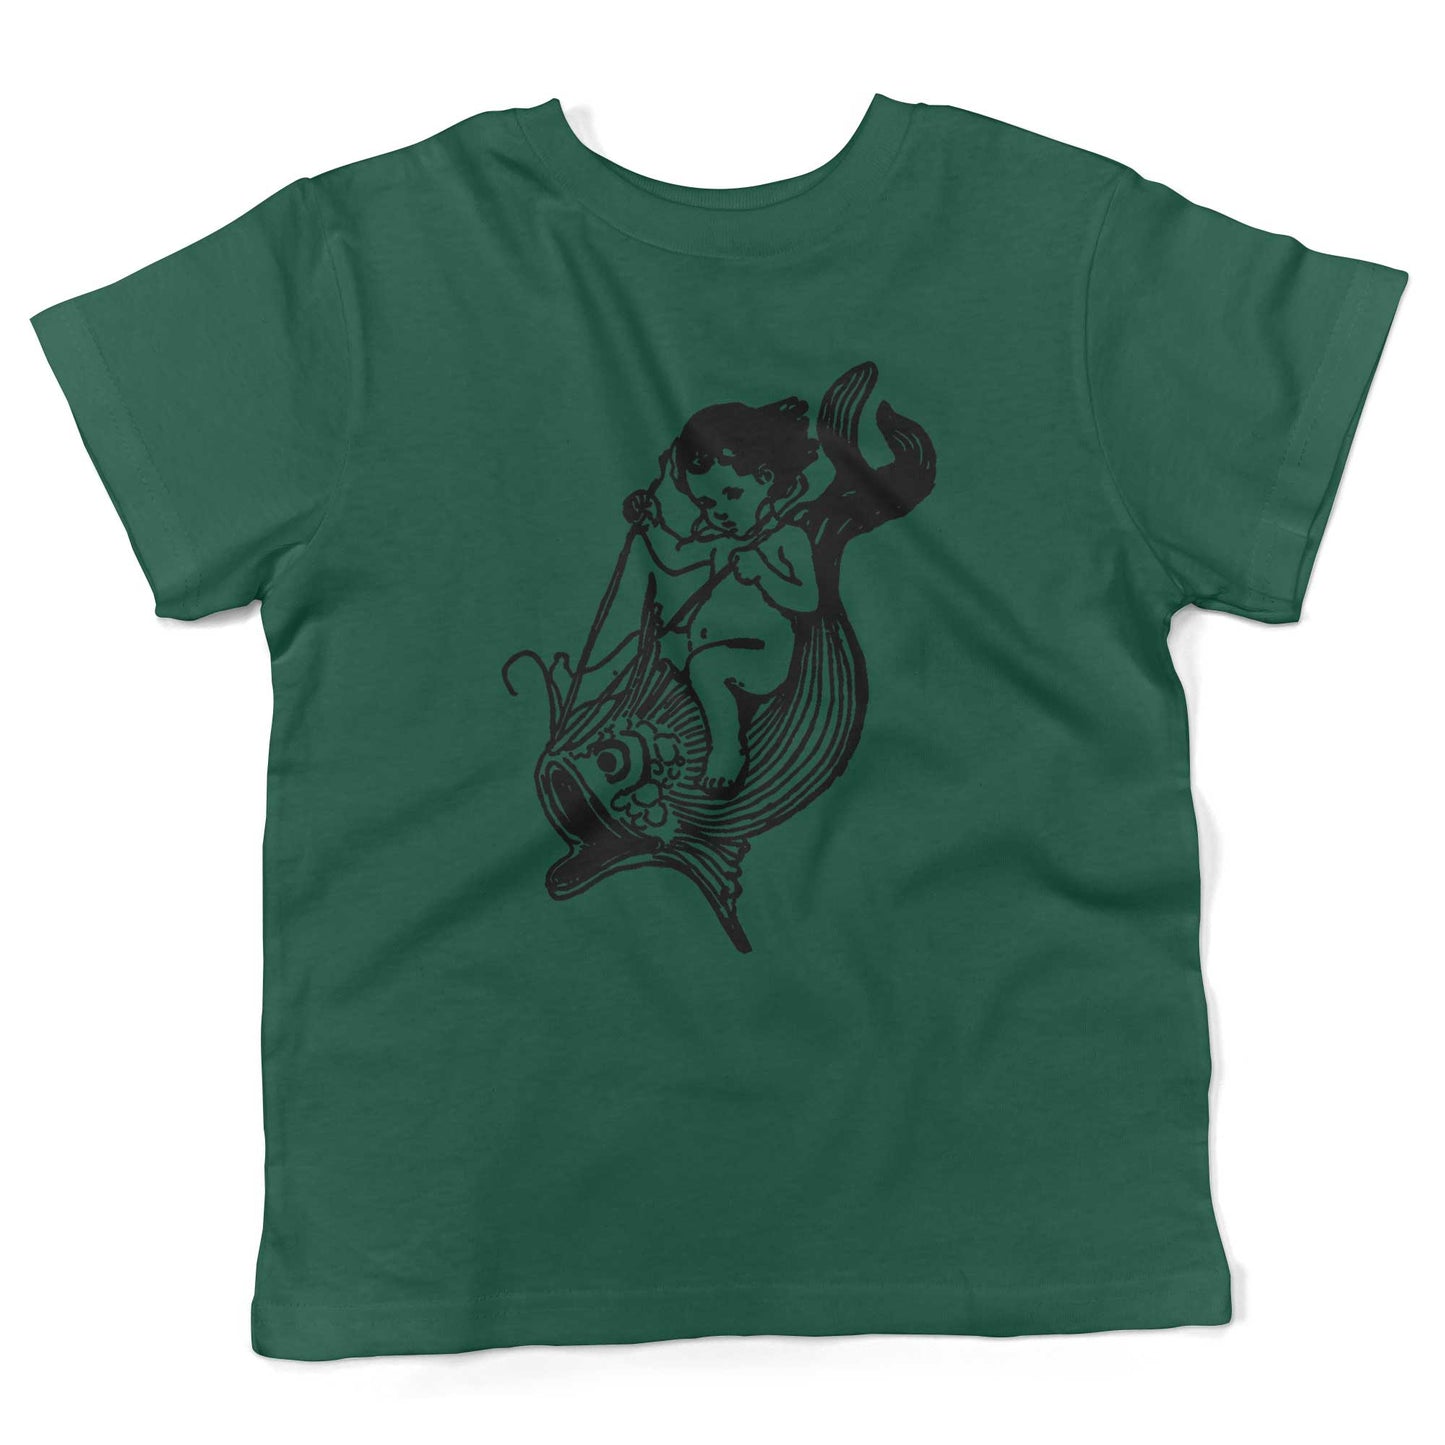 Water Baby Riding A Giant Fish Toddler Shirt-Kelly Green-2T